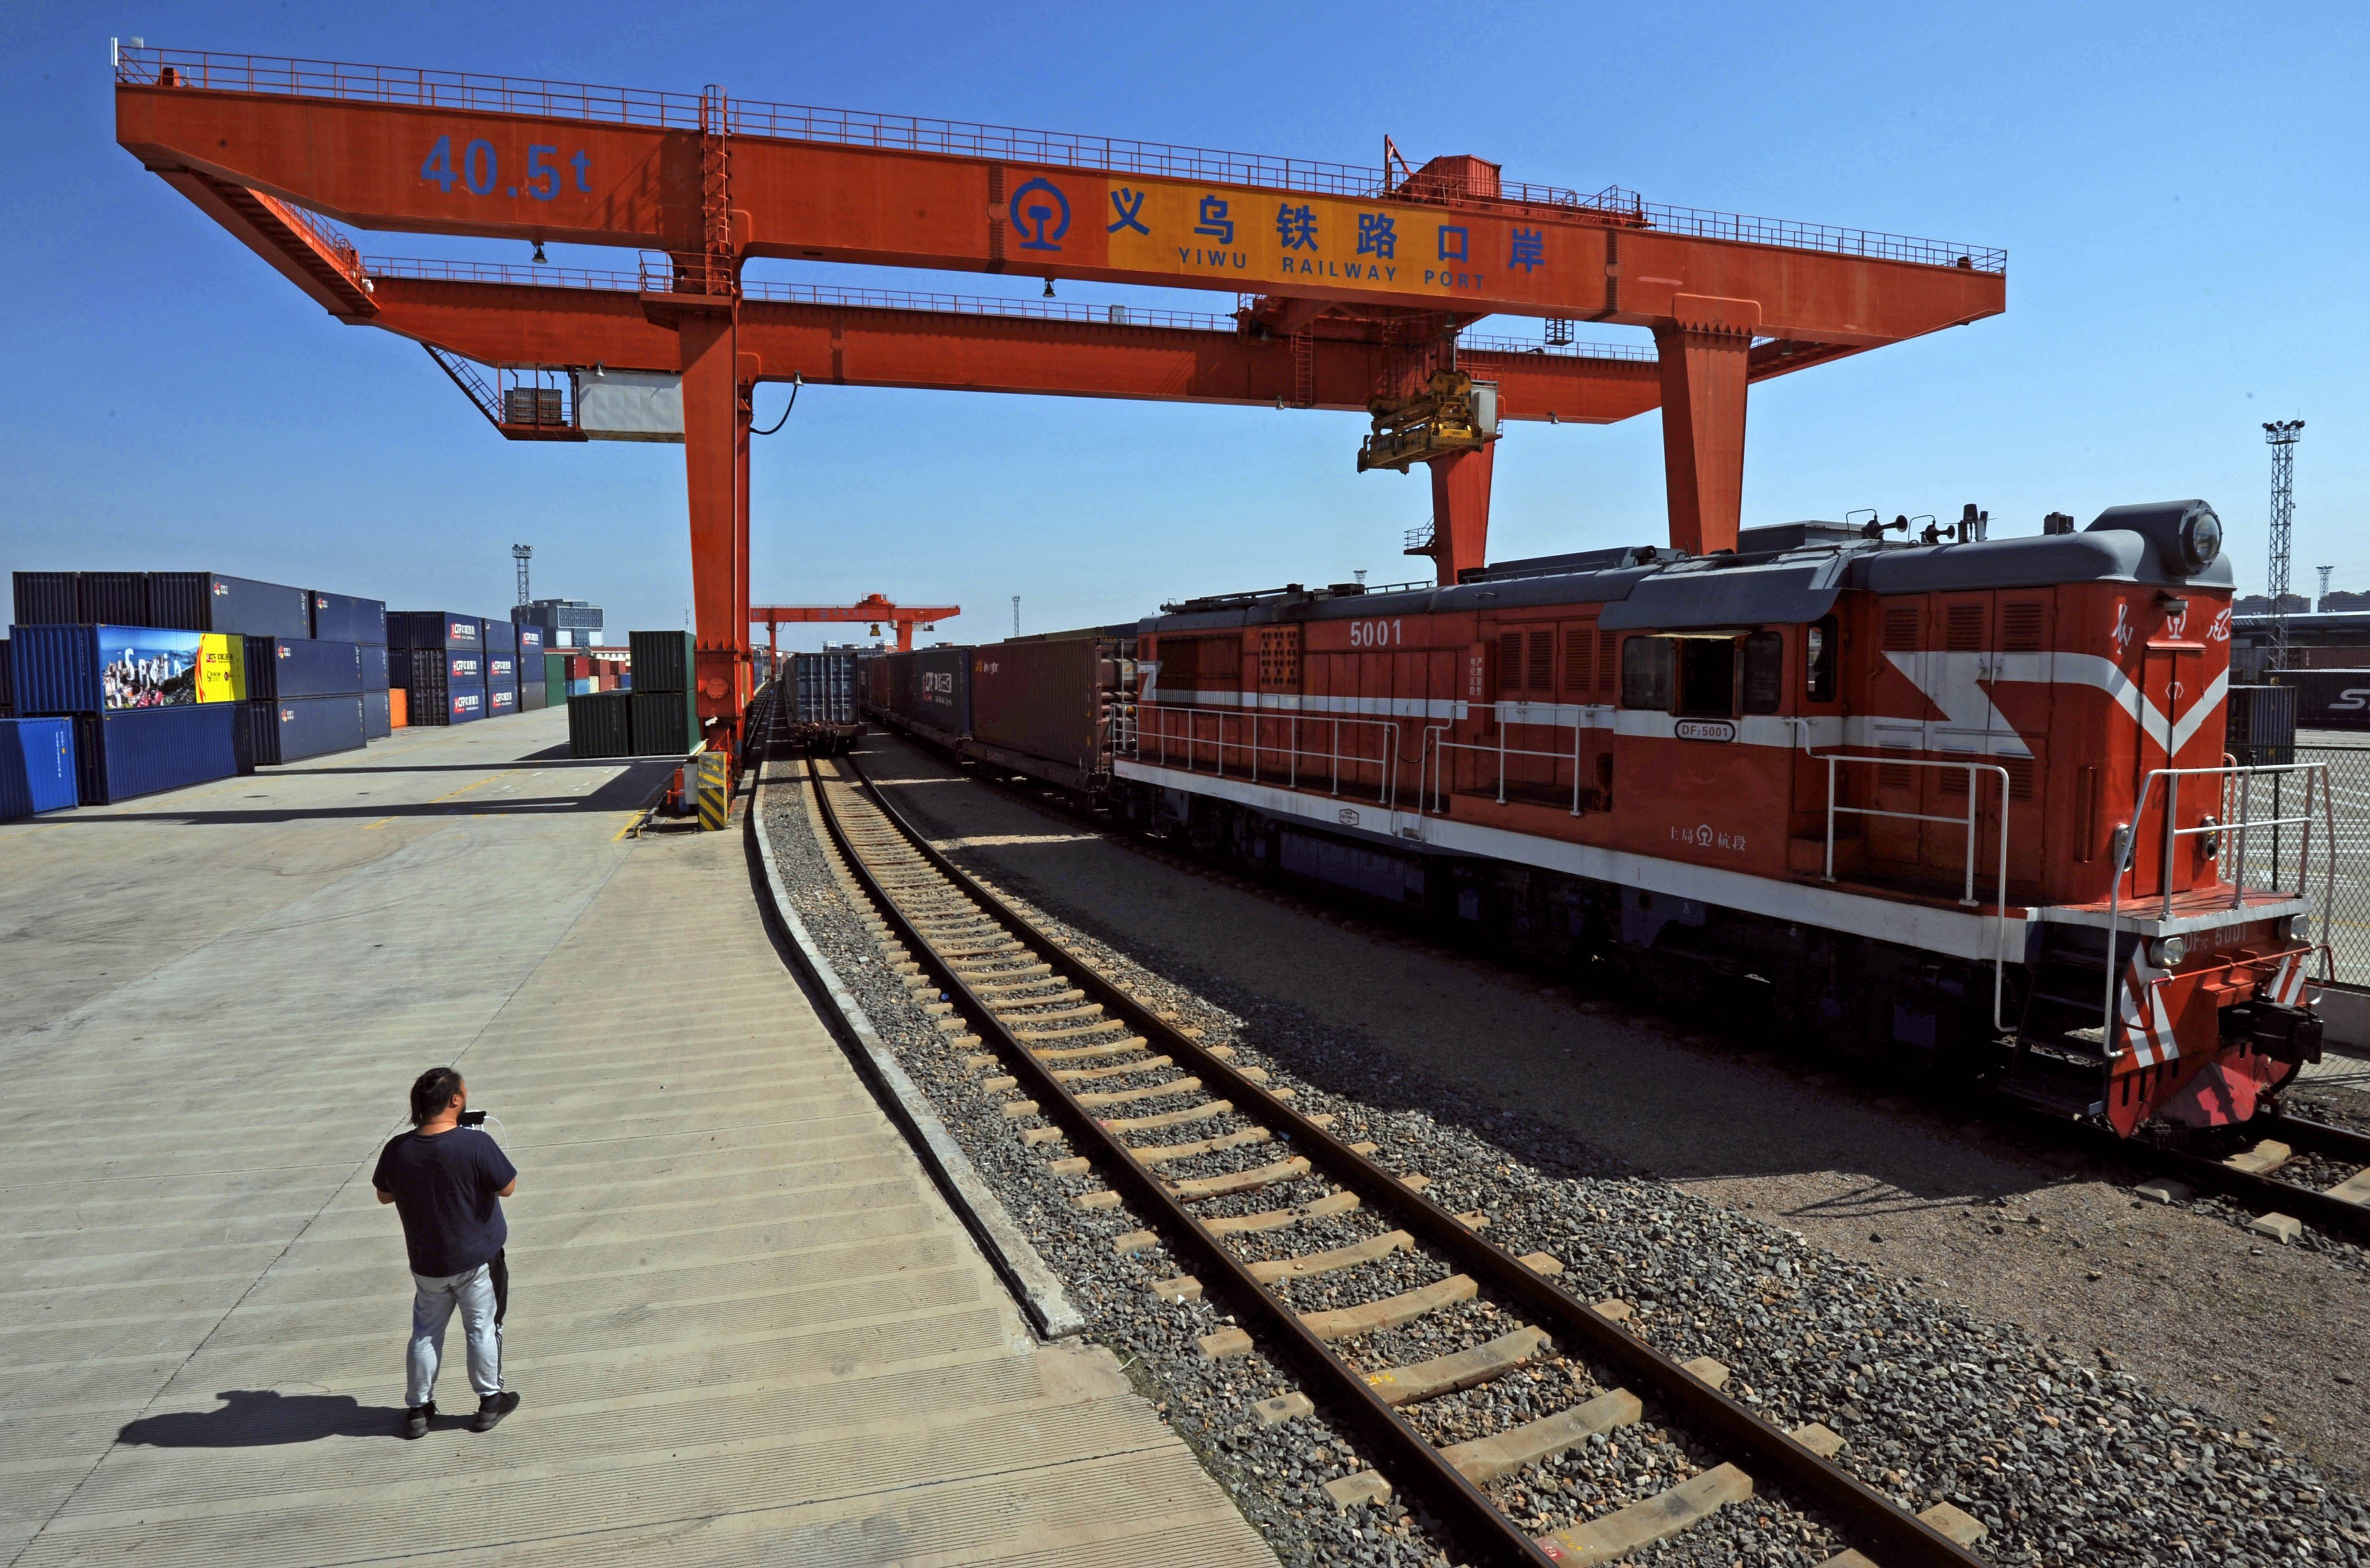 A direct freight train link now runs between the Chinese city of Yiwu and Madrid as part of the Belt and Road Initiative. Photo: Xinhua